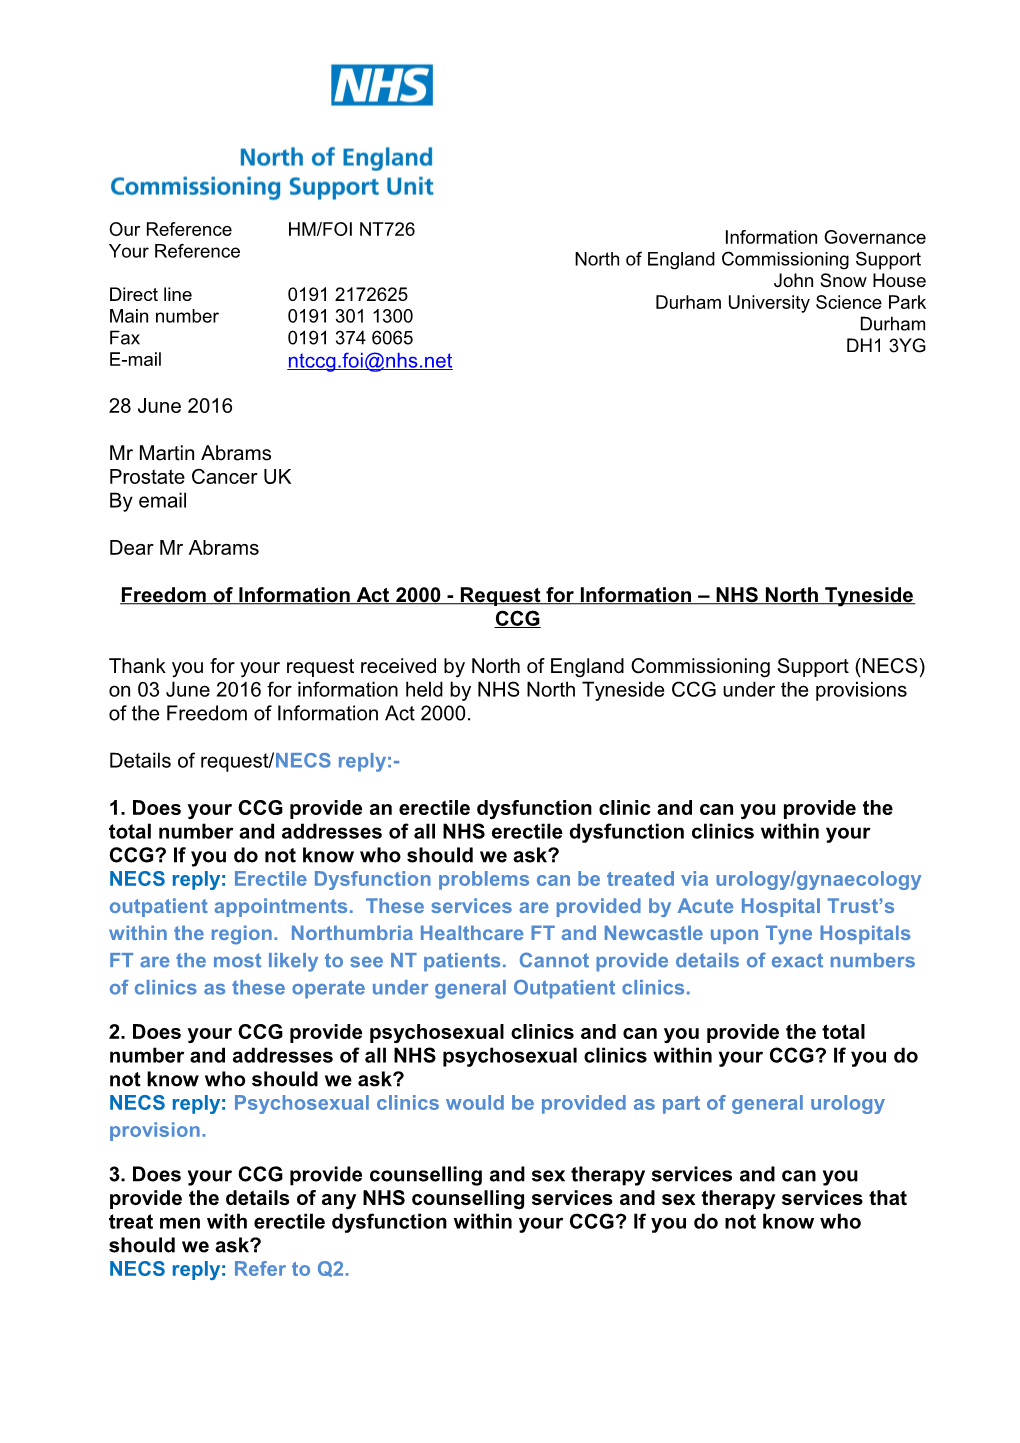 Freedom of Information Act 2000 - Request for Information NHS North Tyneside CCG